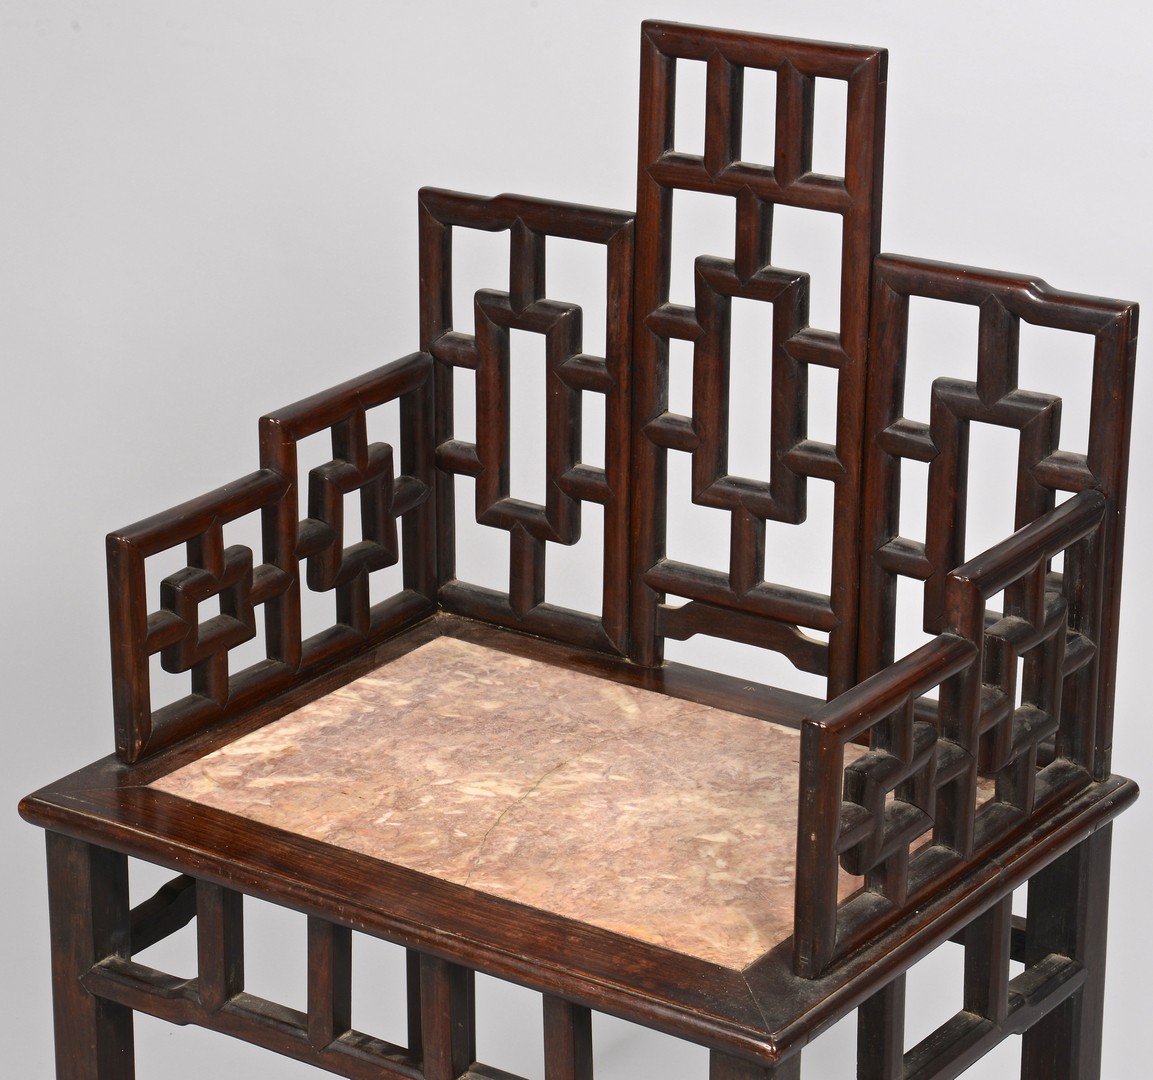 Lot 30: Chinese Throne Chair, early 20th century